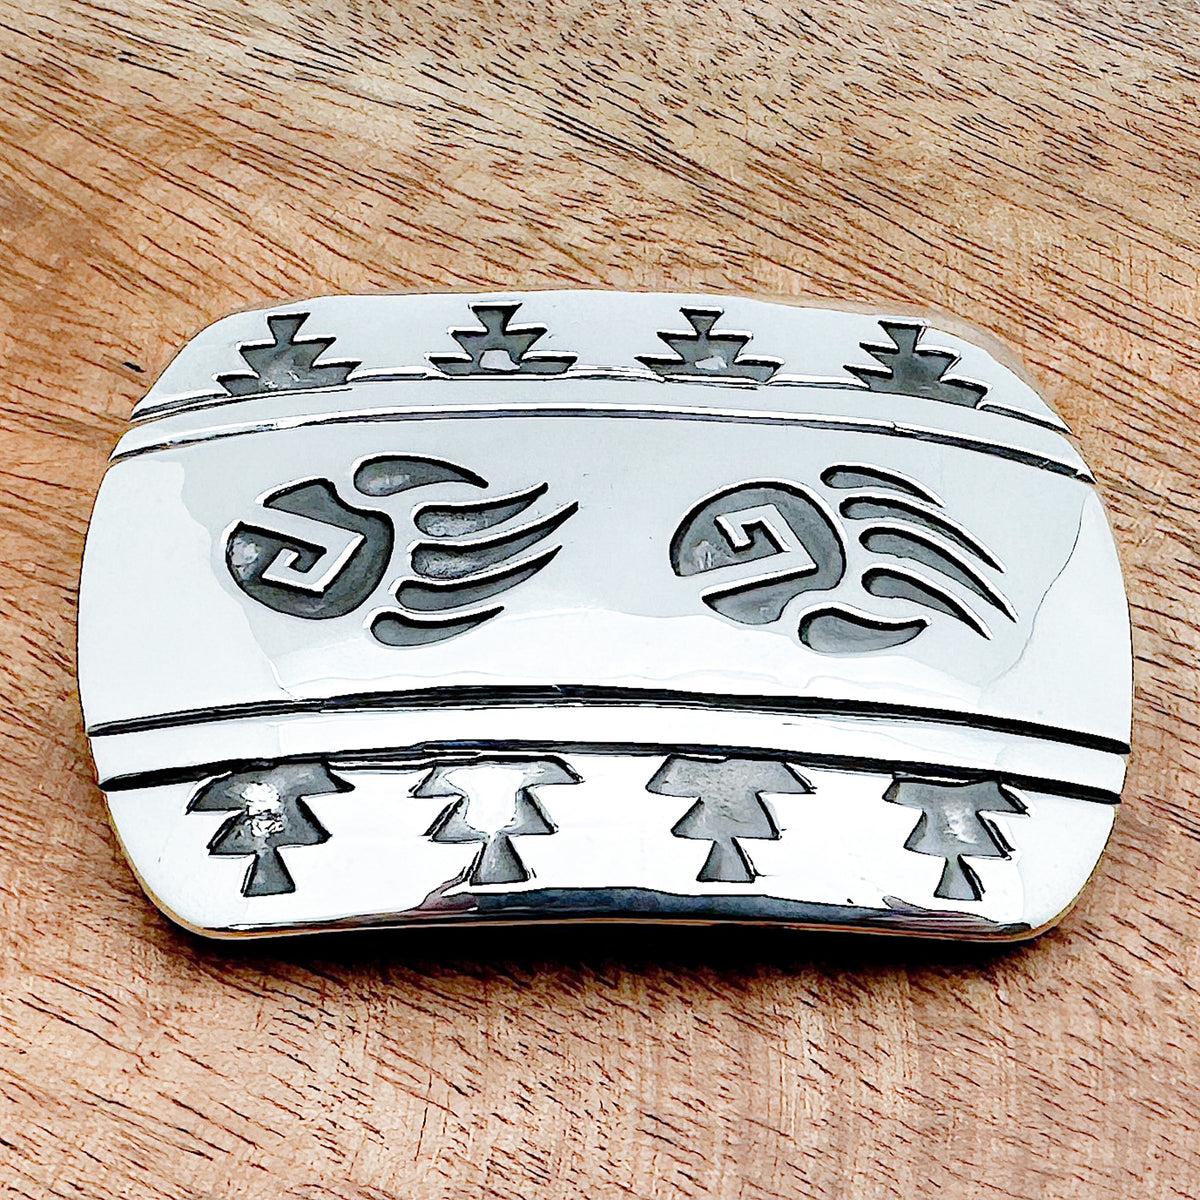 Silver belt buckle with bear paws etched into it